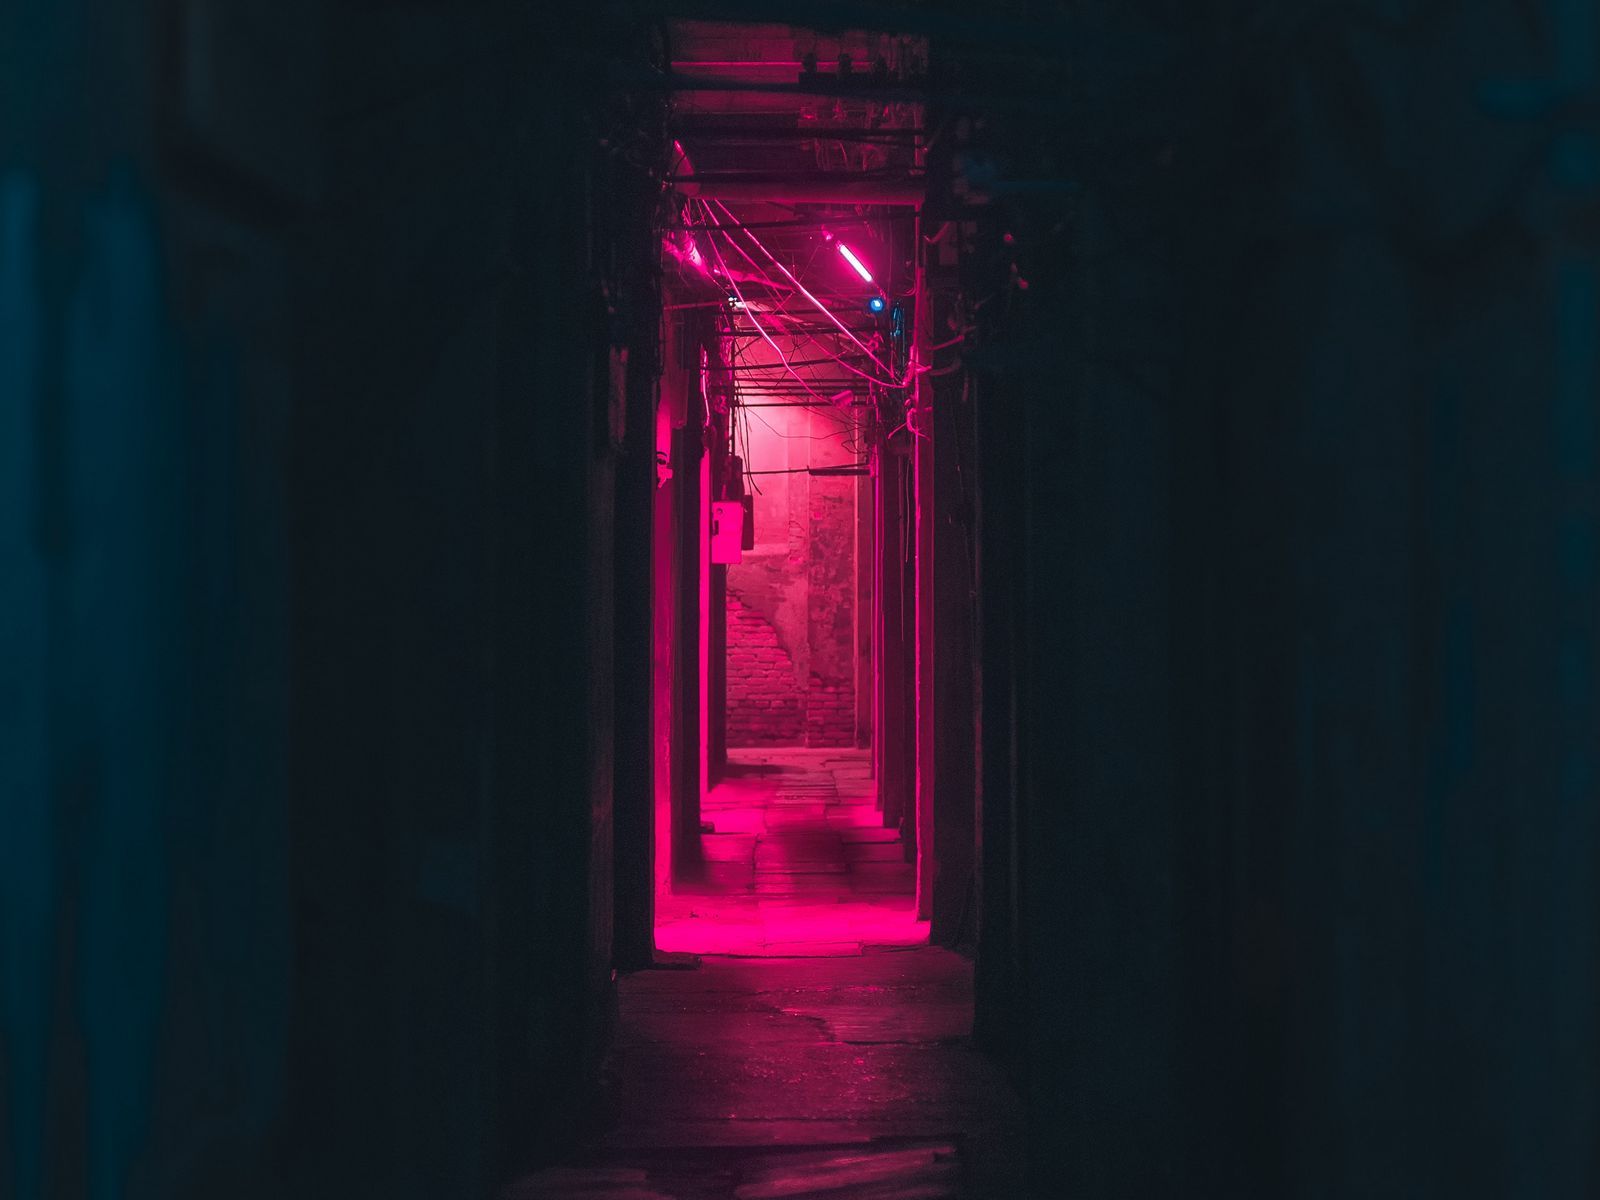 A dark and narrow hallway lit with pink neon lights. - Hot pink, neon pink, light pink